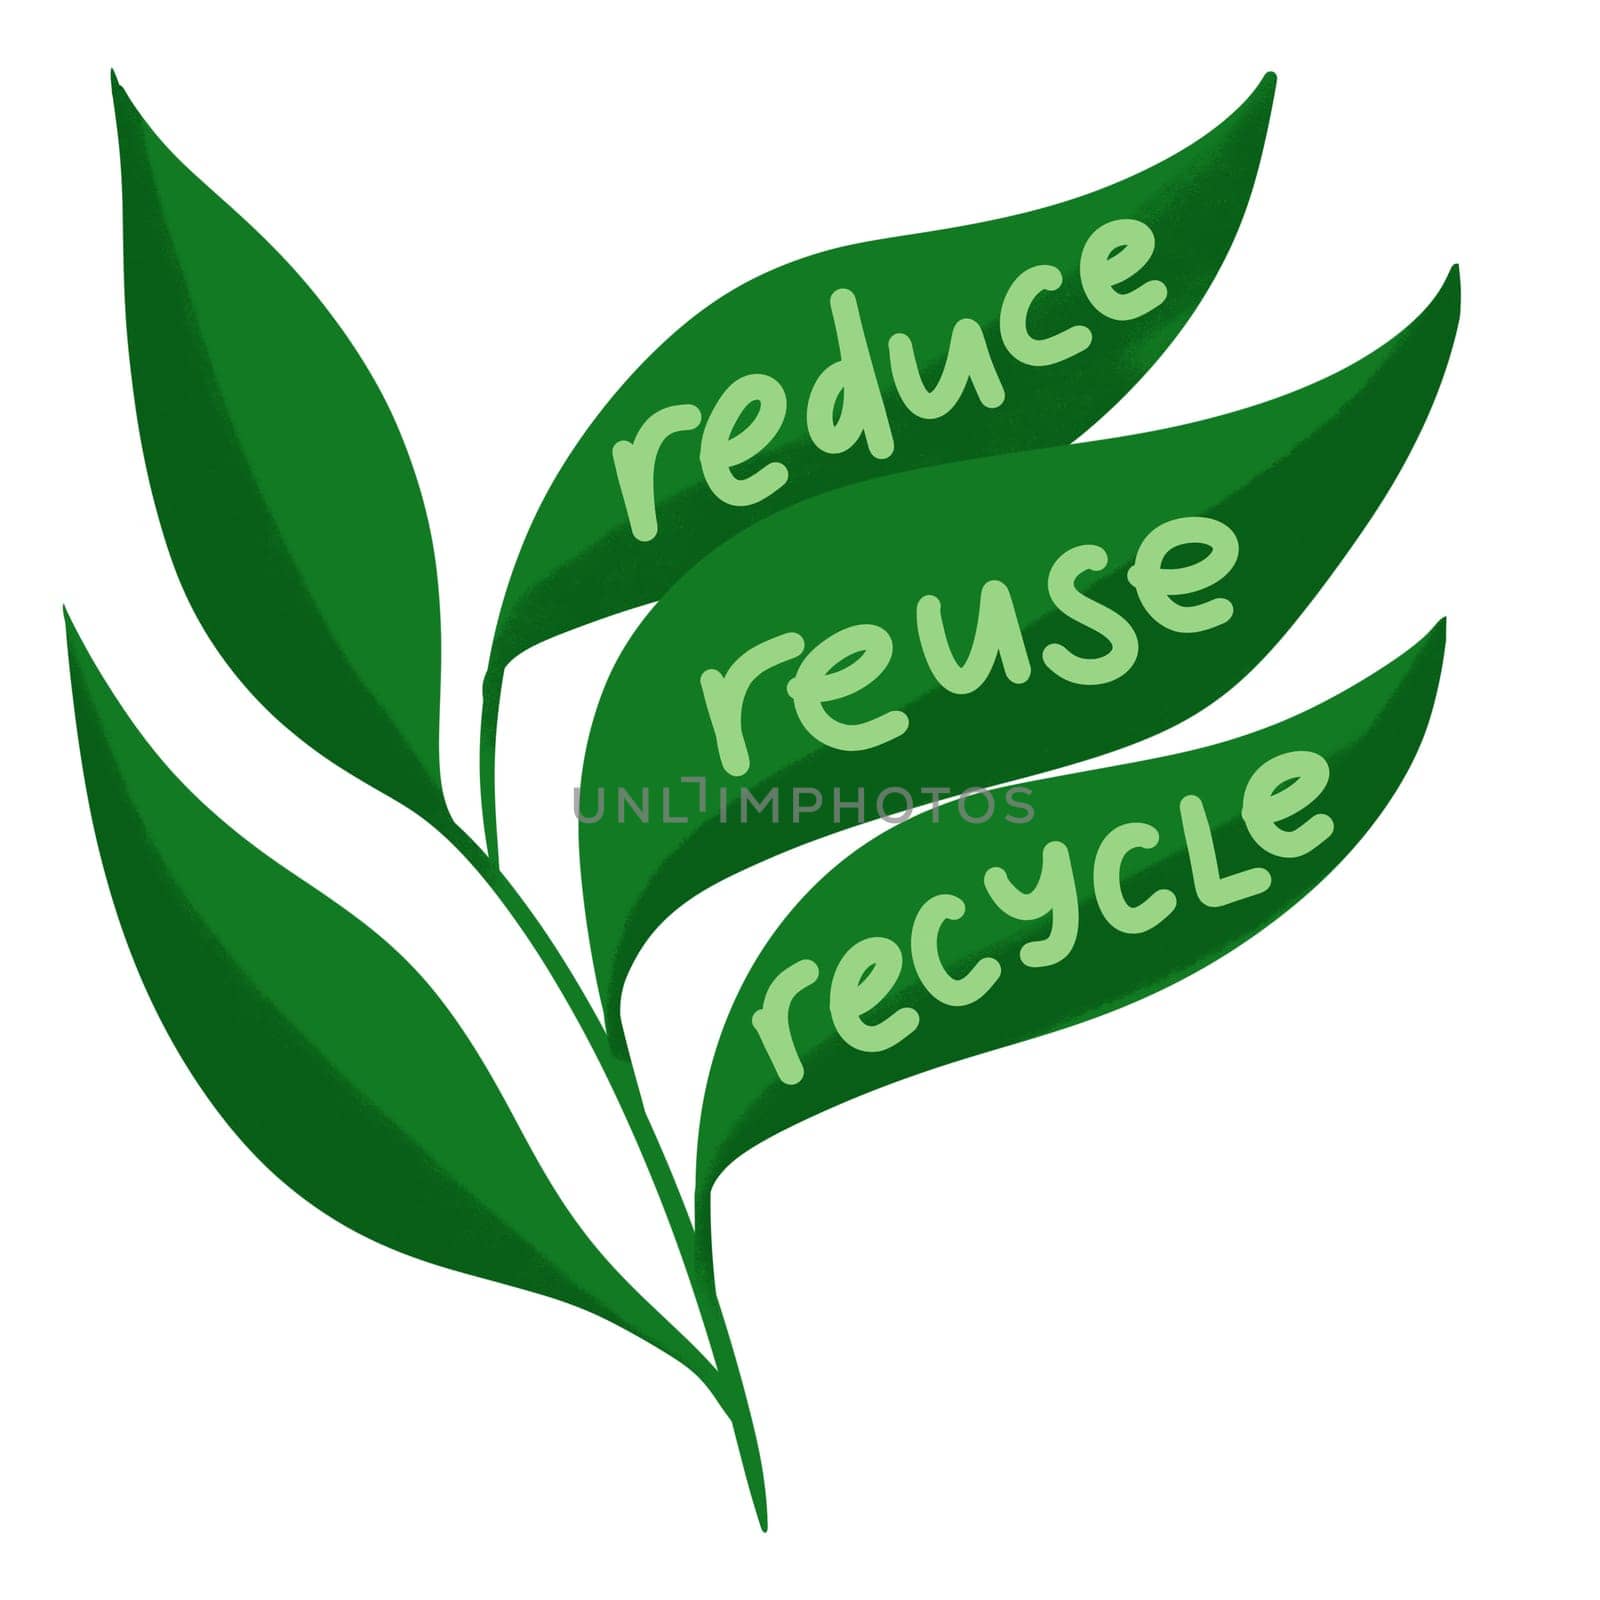 Hand drawn illustration of reduce reuse recycle ecological concept on green leaf leaves. Environment protection slogan, waste garbage control, organic ecology recycling icon logo. by Lagmar